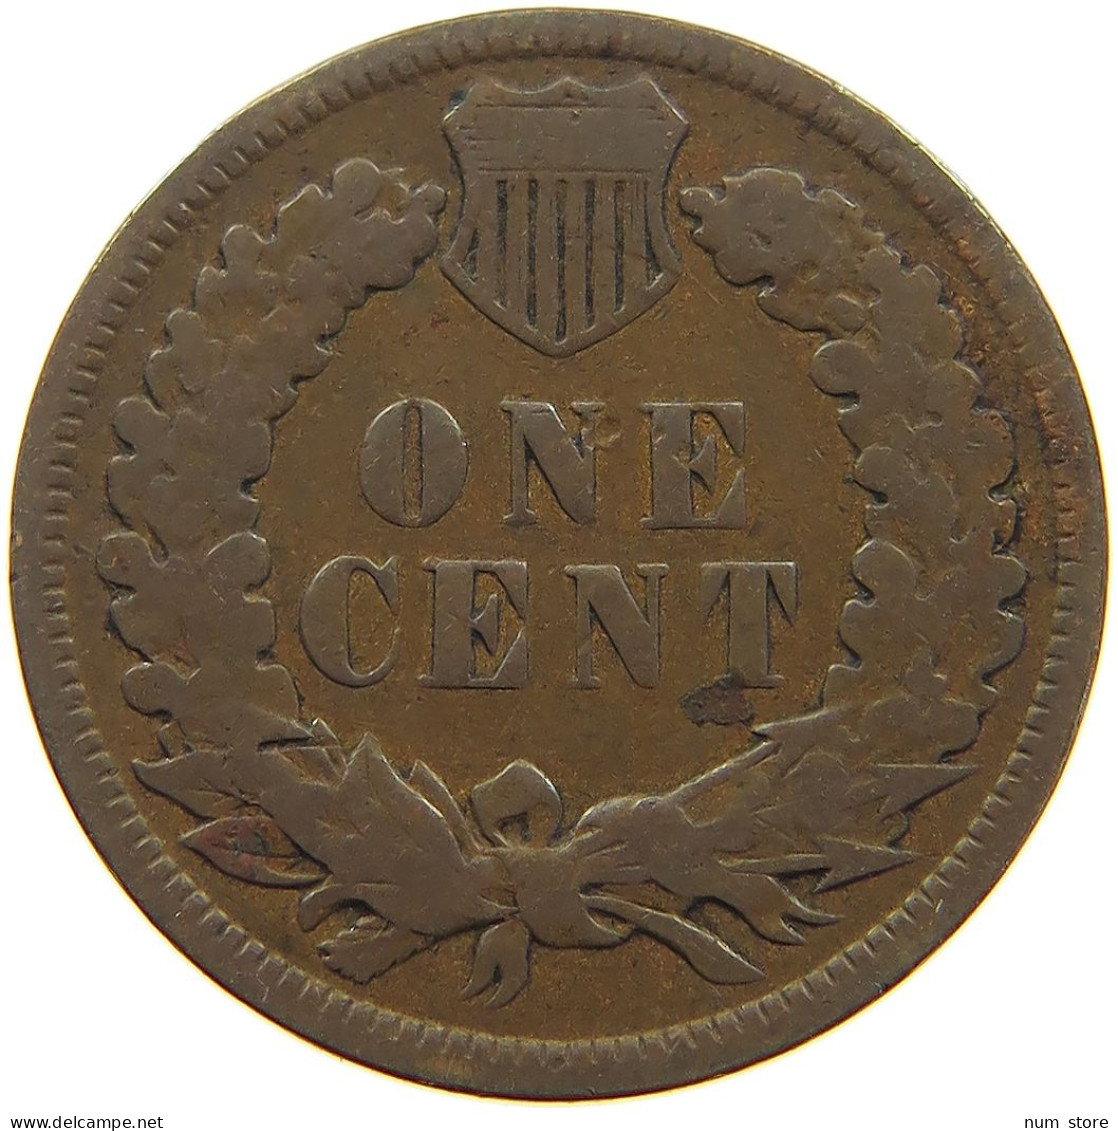 UNITED STATES OF AMERICA CENT 1892 INDIAN HEAD #a063 0203 - 1859-1909: Indian Head